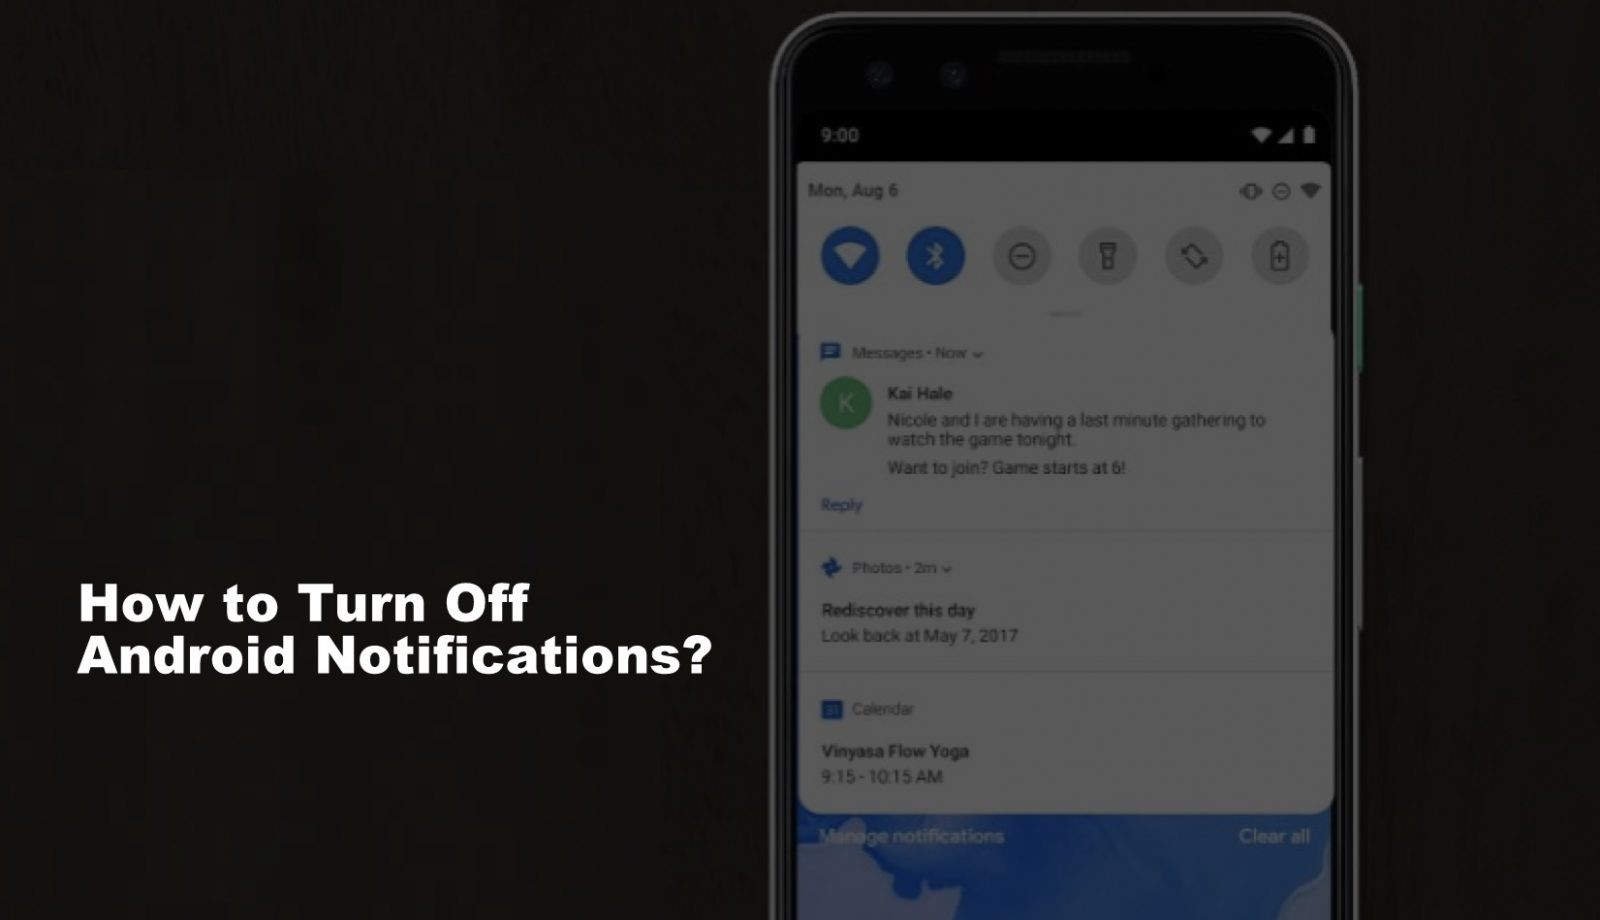 How To Turn Off Notifications On Android in 2 Easy Ways